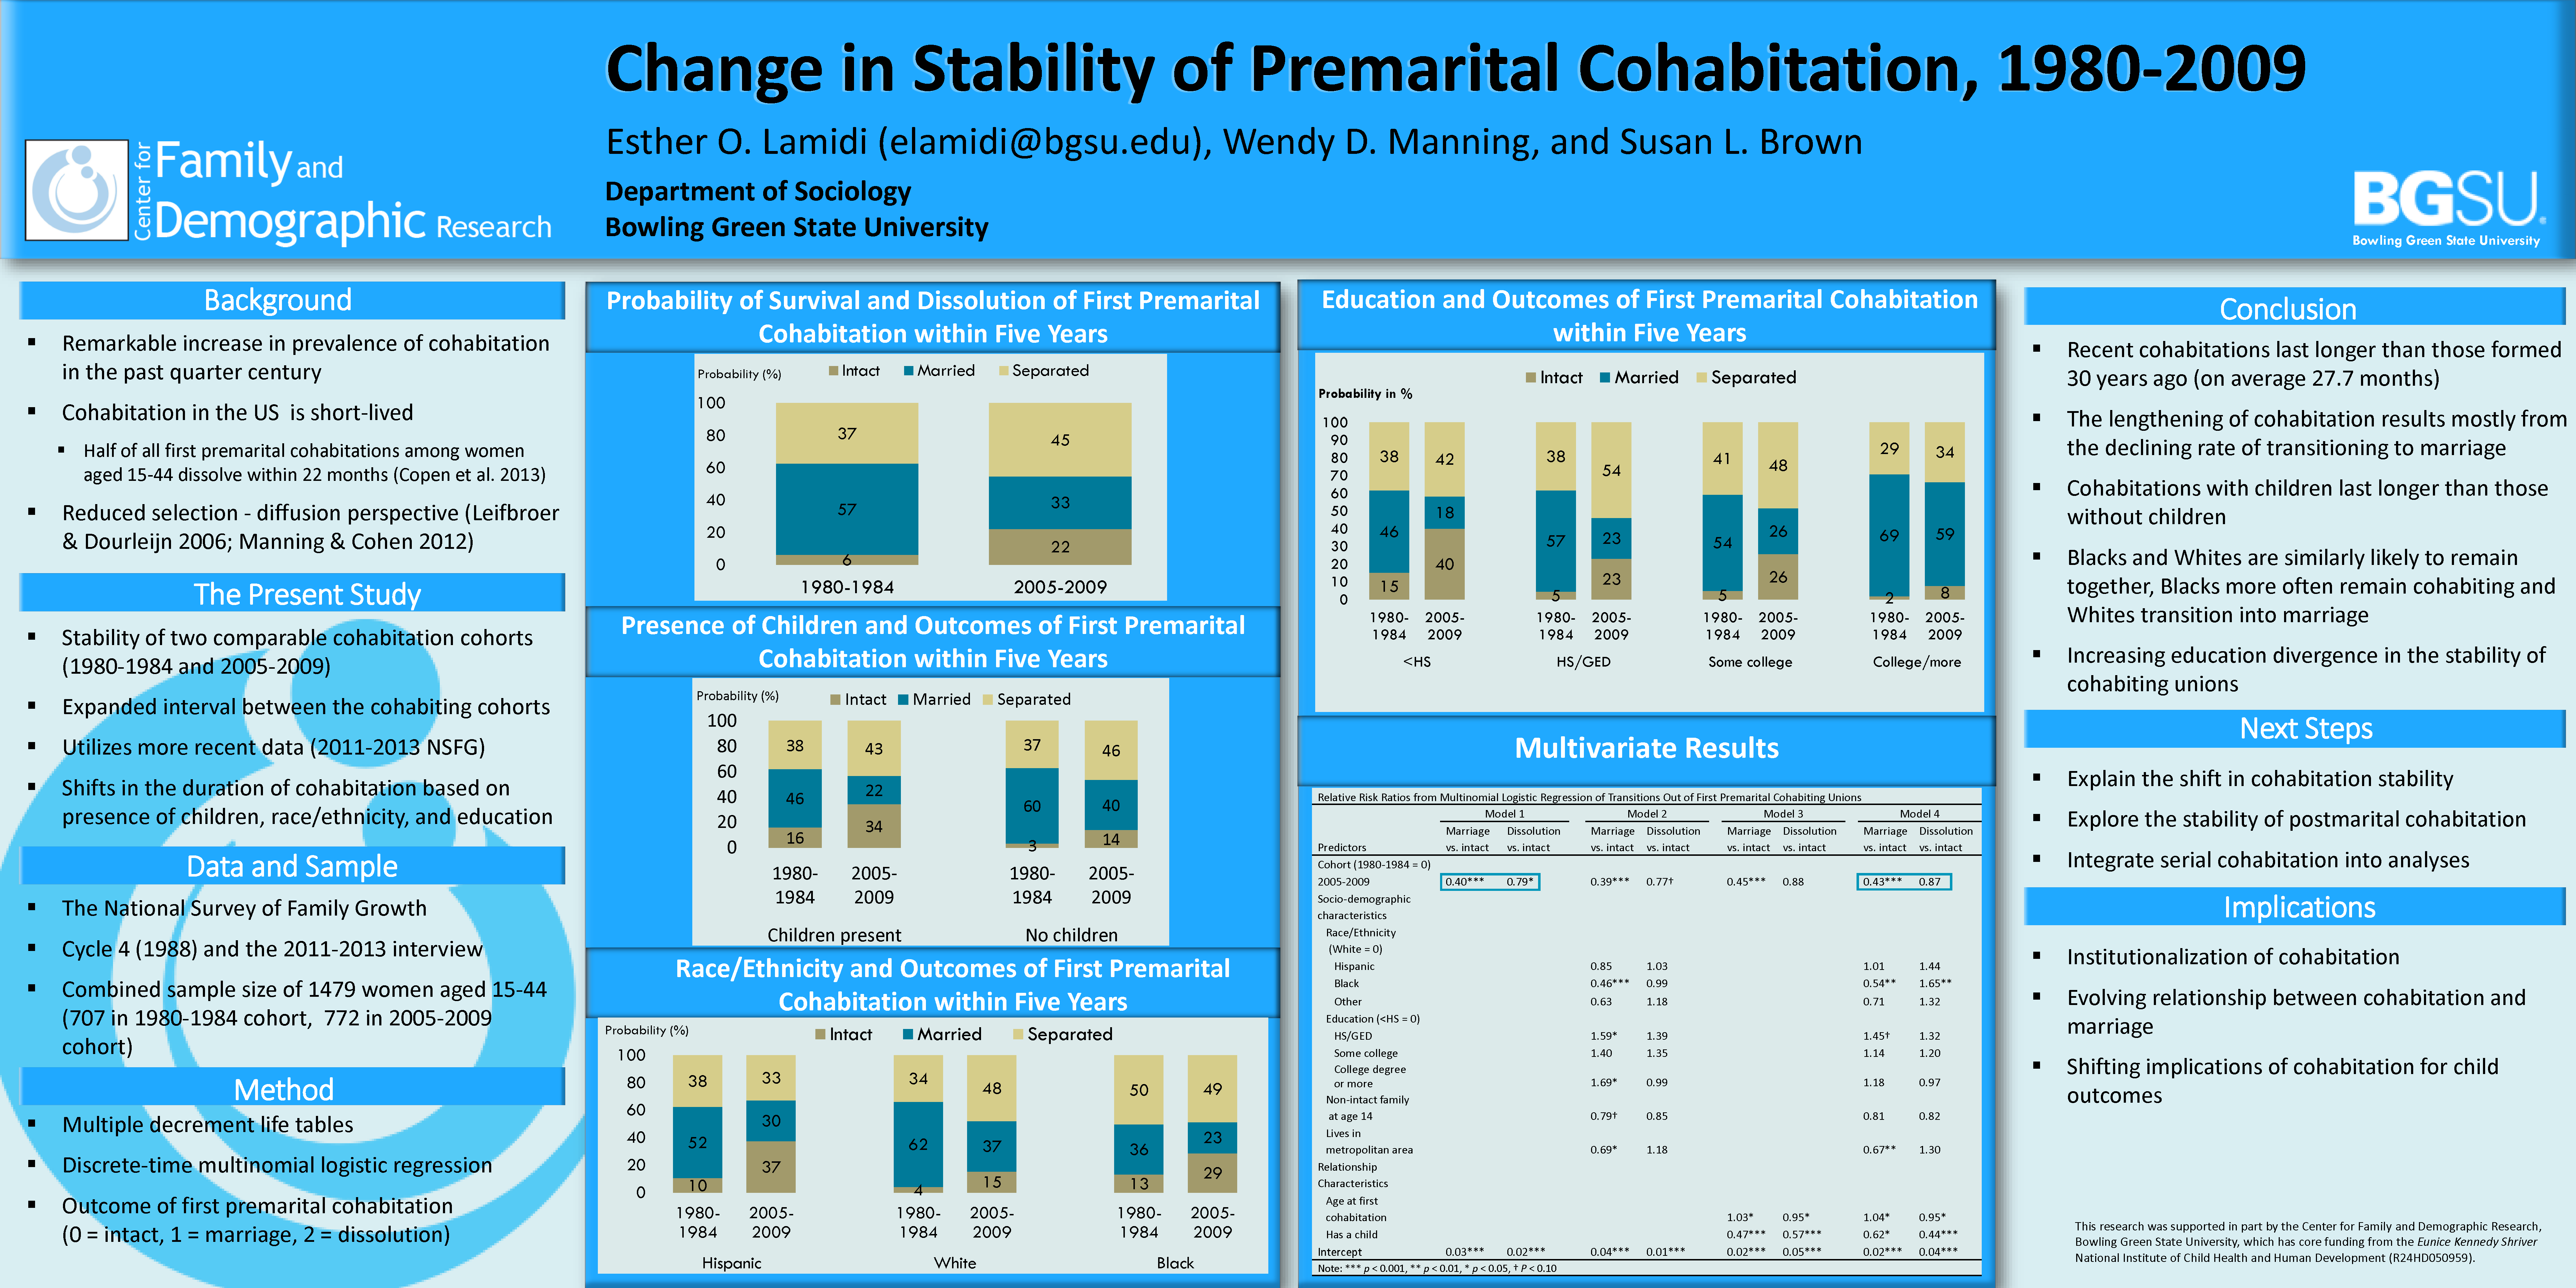 Changes in Stability of Premarital Cohabitation chart